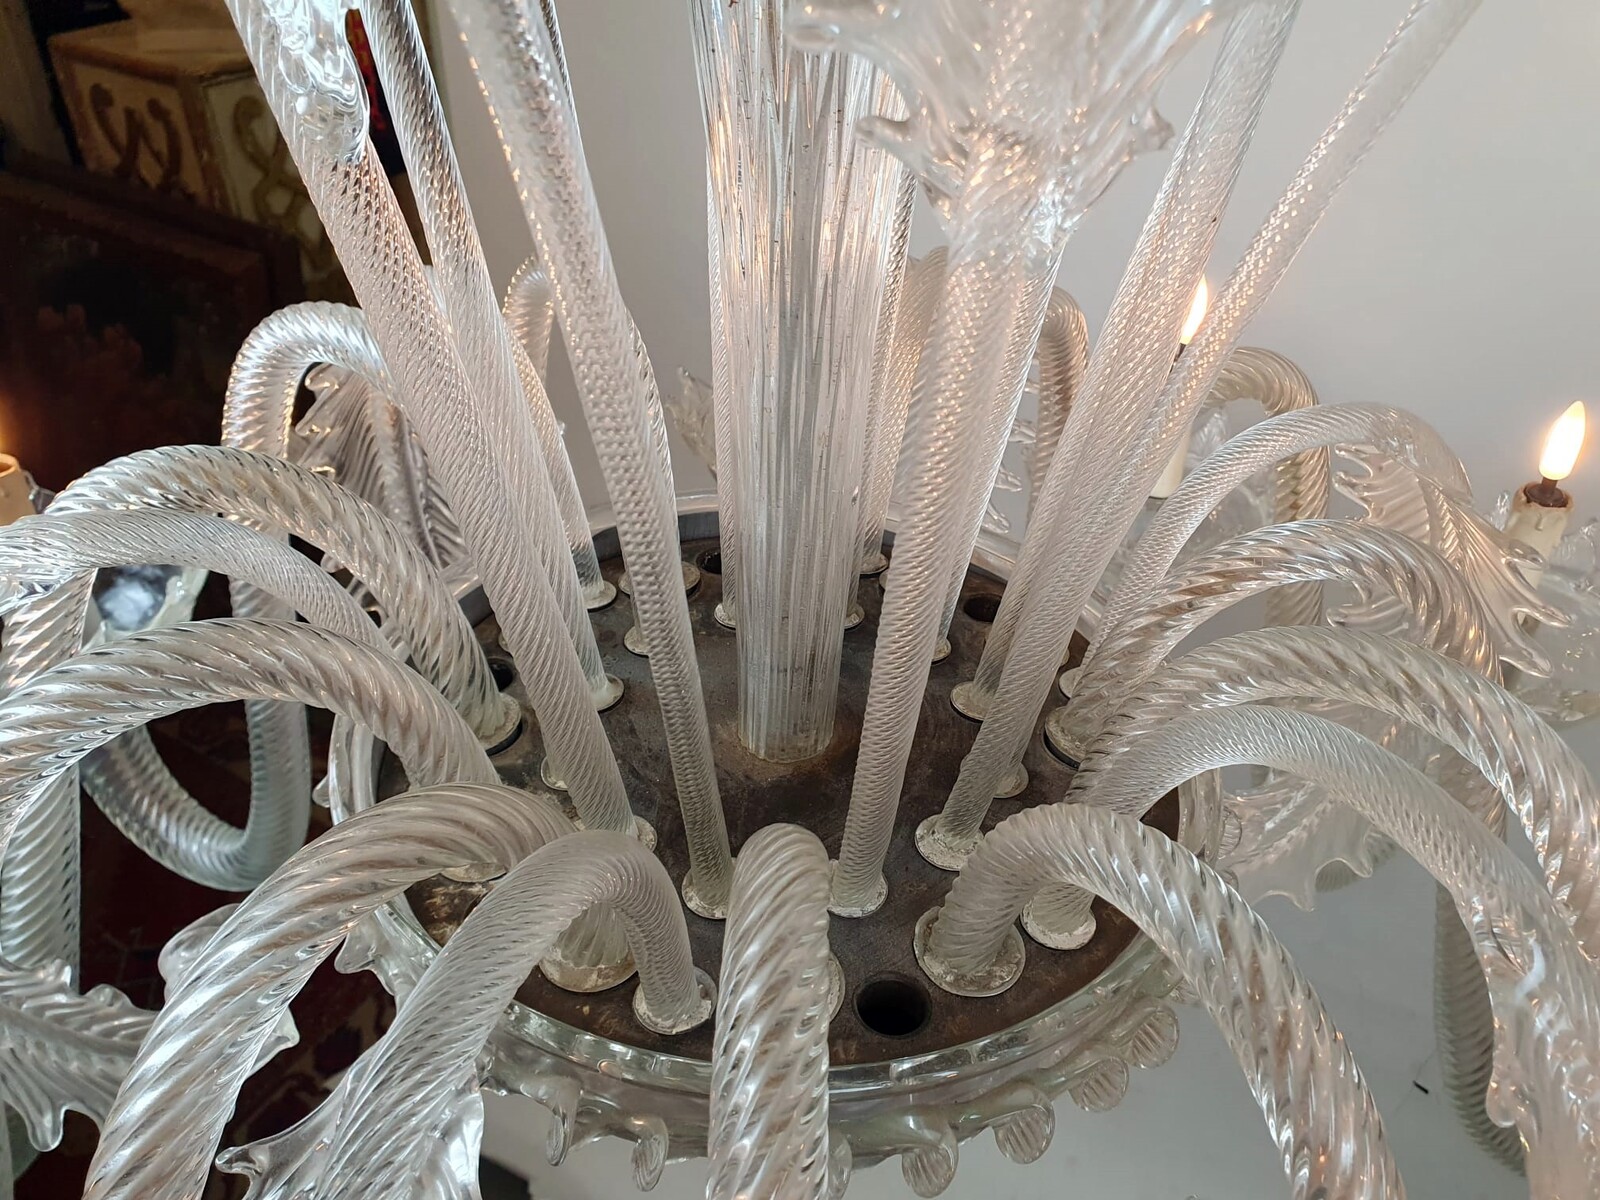 Large Murano glass chandelier - 12 arms of light